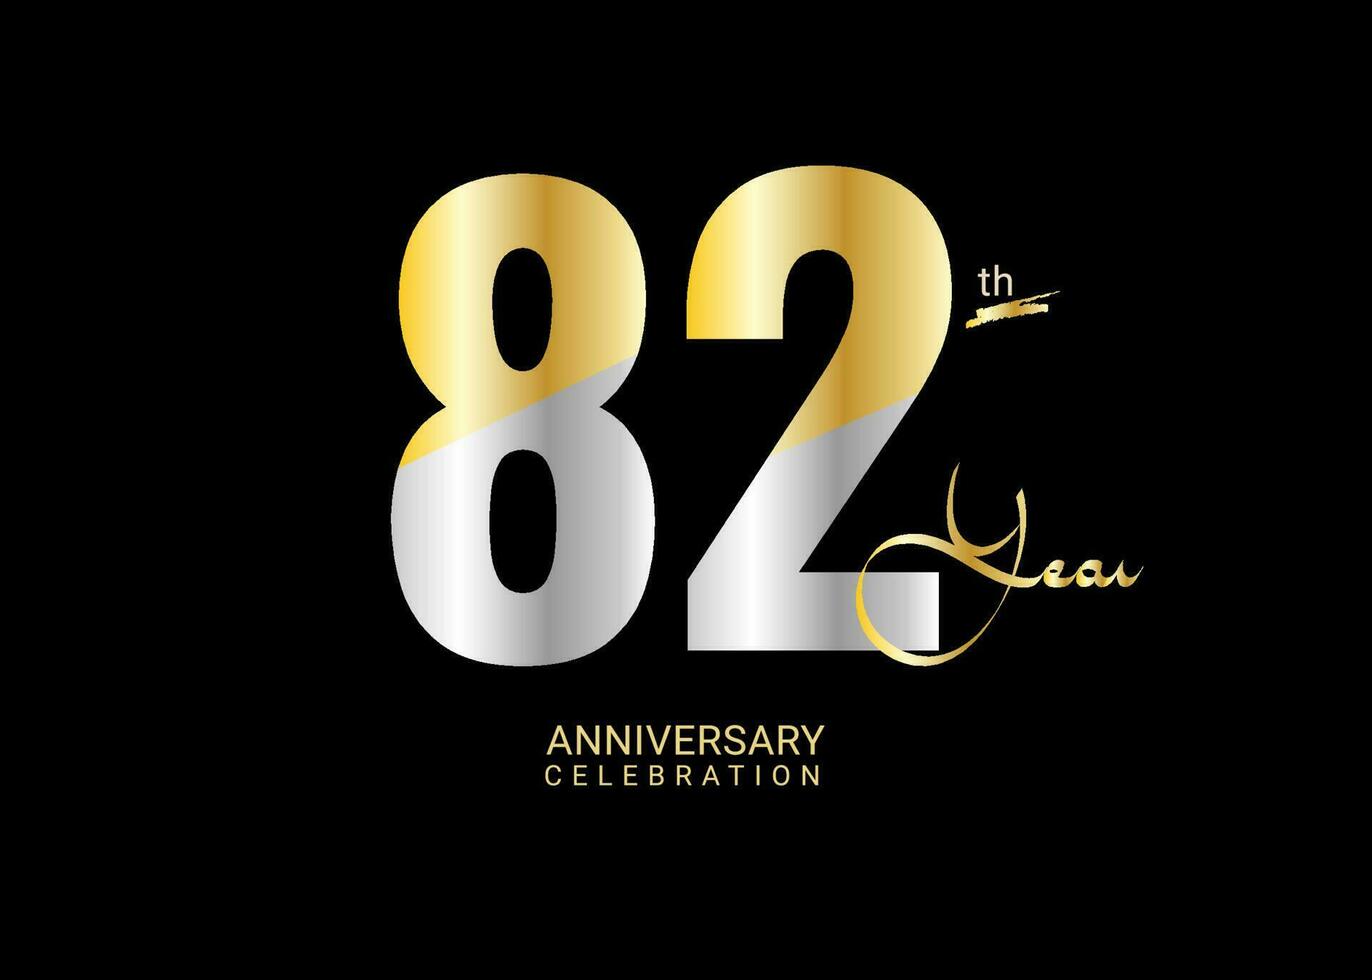 82 Years Anniversary Celebration gold and silver Vector Template, 82 number logo design, 82th Birthday Logo,  logotype Anniversary, Vector Anniversary For Celebration, poster, Invitation Card